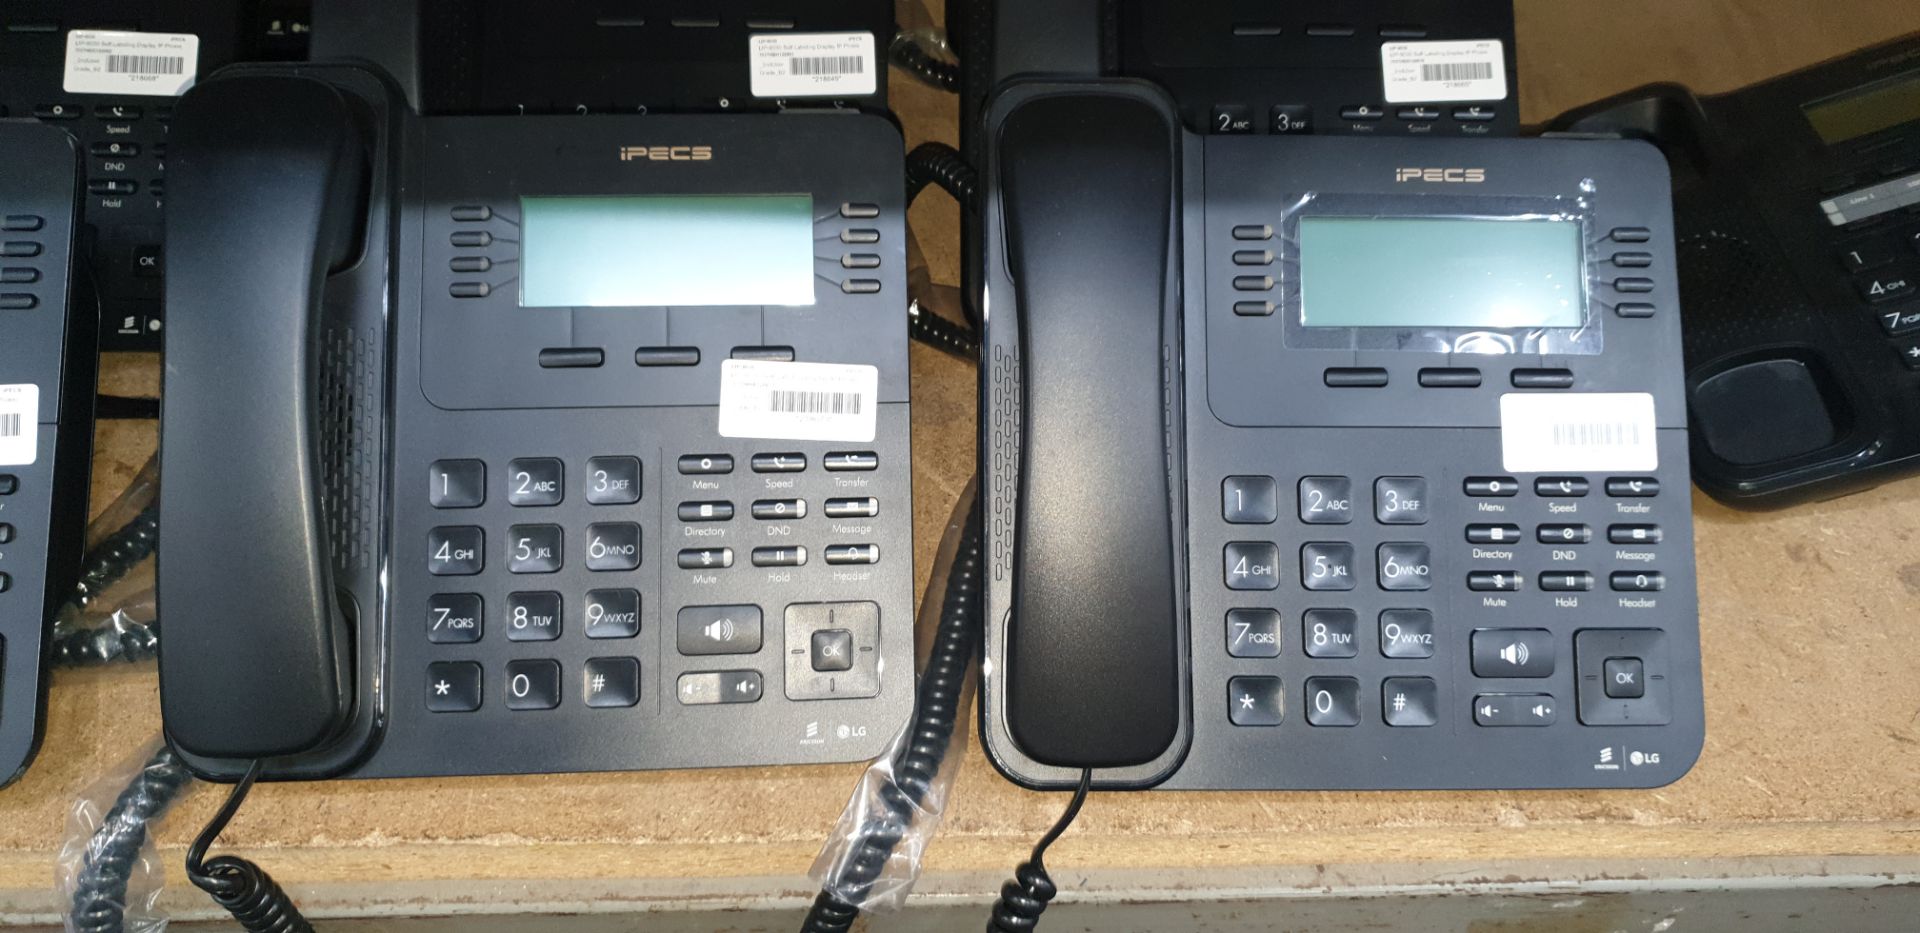 13 off iPECS IP phone handsets, comprising 12 off model LIP-9030 & 1 off LIP model 9020 with 24 butt - Image 5 of 8